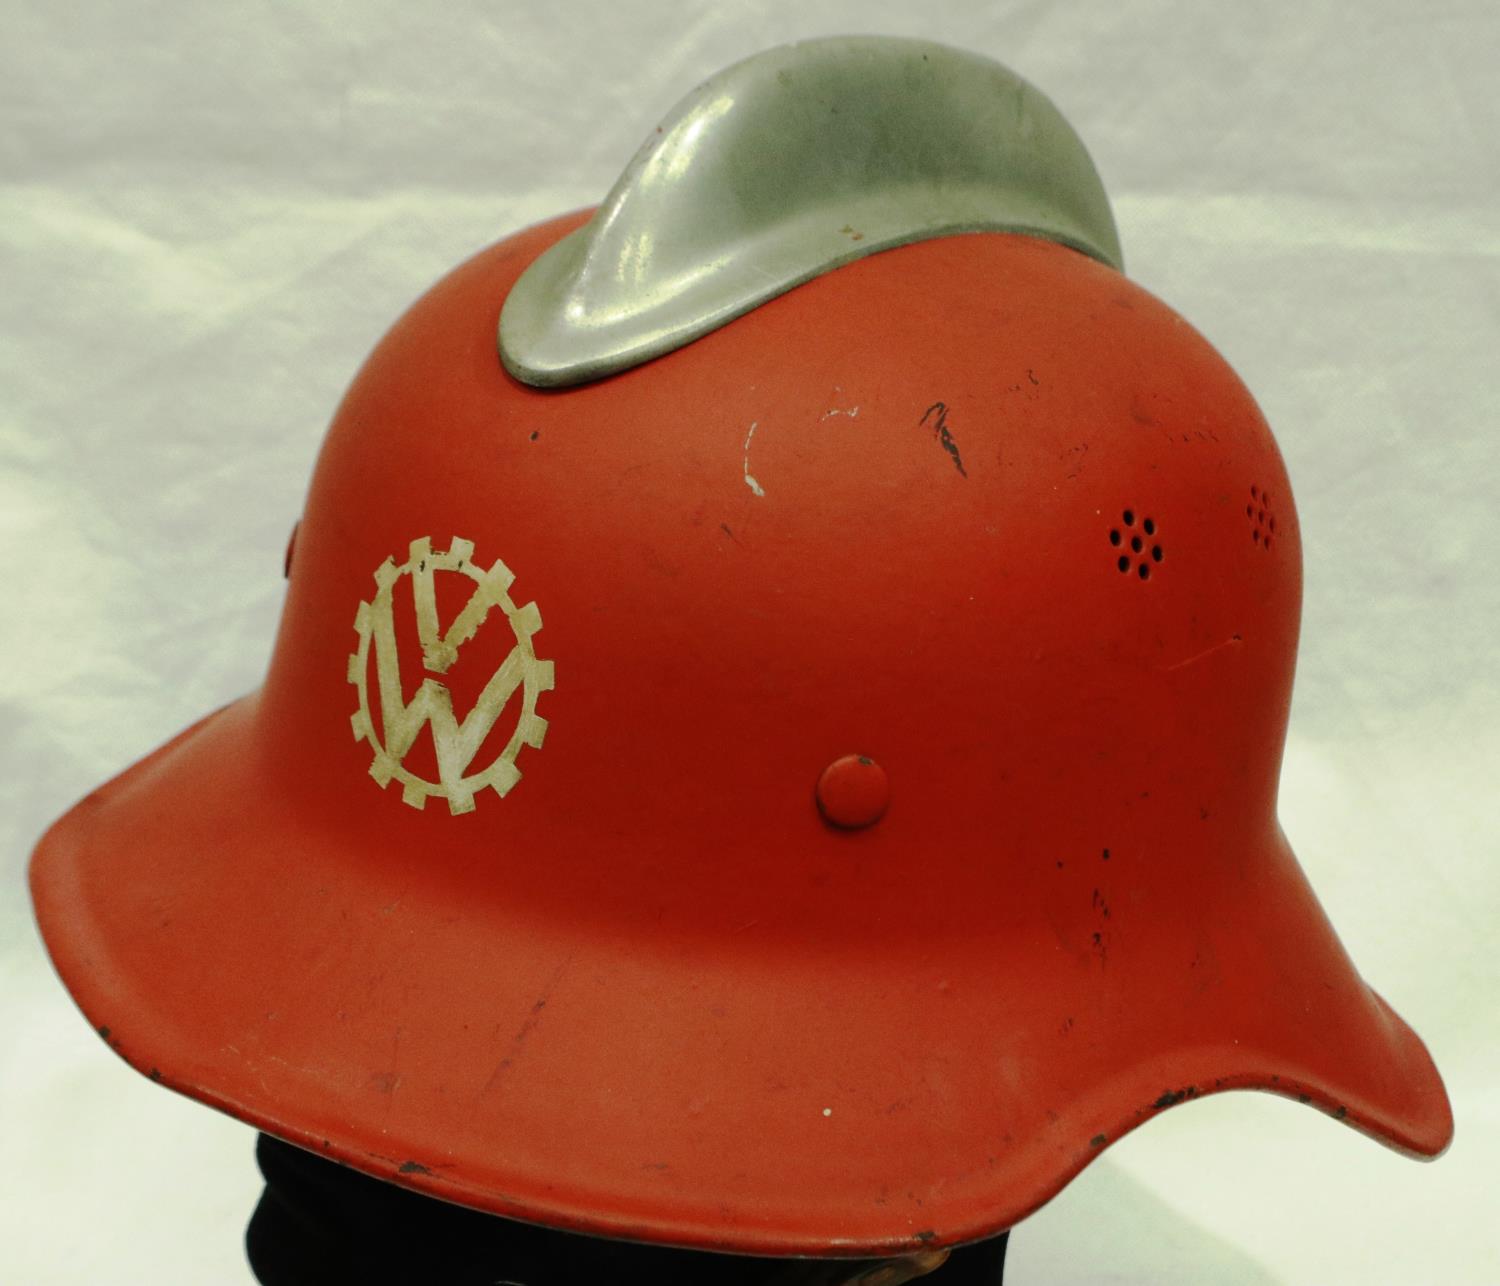 WWII German Volkswagen Factory Fire Workers helmet. P&P Group 2 (£18+VAT for the first lot and £3+